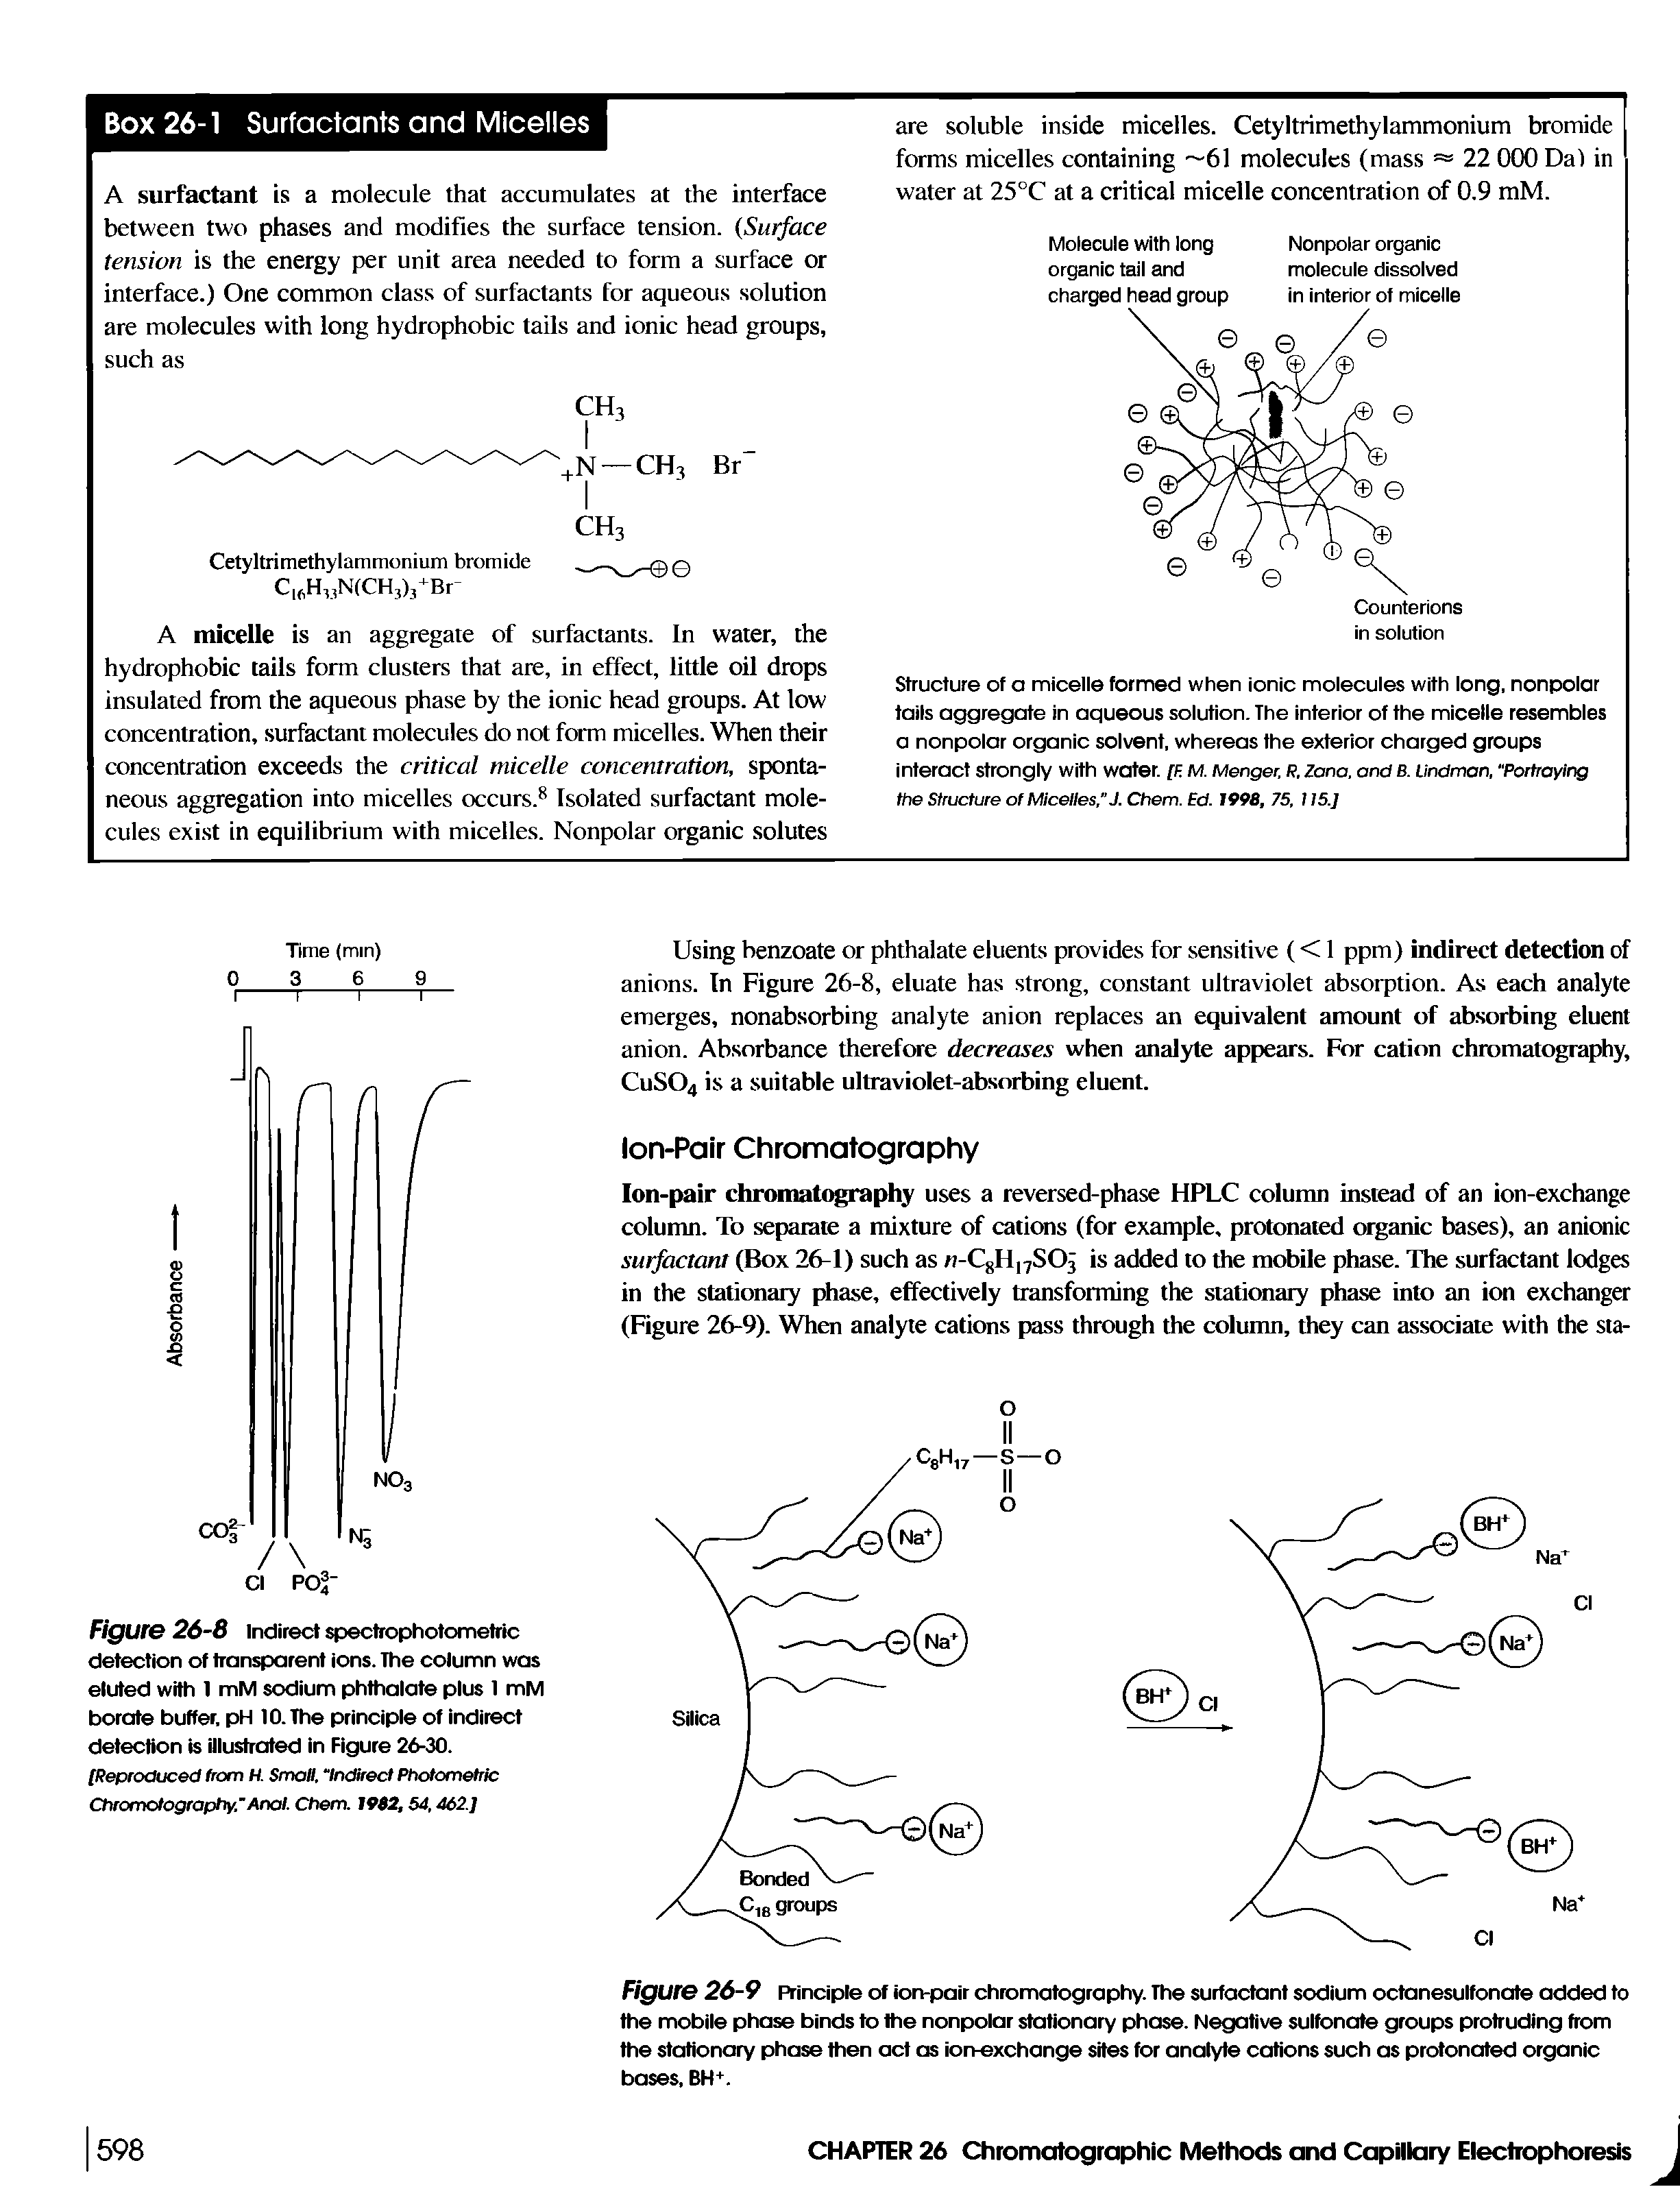 Figure 26-9 Principle of ion-pair chromatography. The surfactant sodium octanesulfonate added to the mobile phase binds to the nonpolar stationary phase. Negative sulfonate groups protruding from the stationary phase then act as ion-exchange sites for analyte cations such as protonated organic bases, BH+.